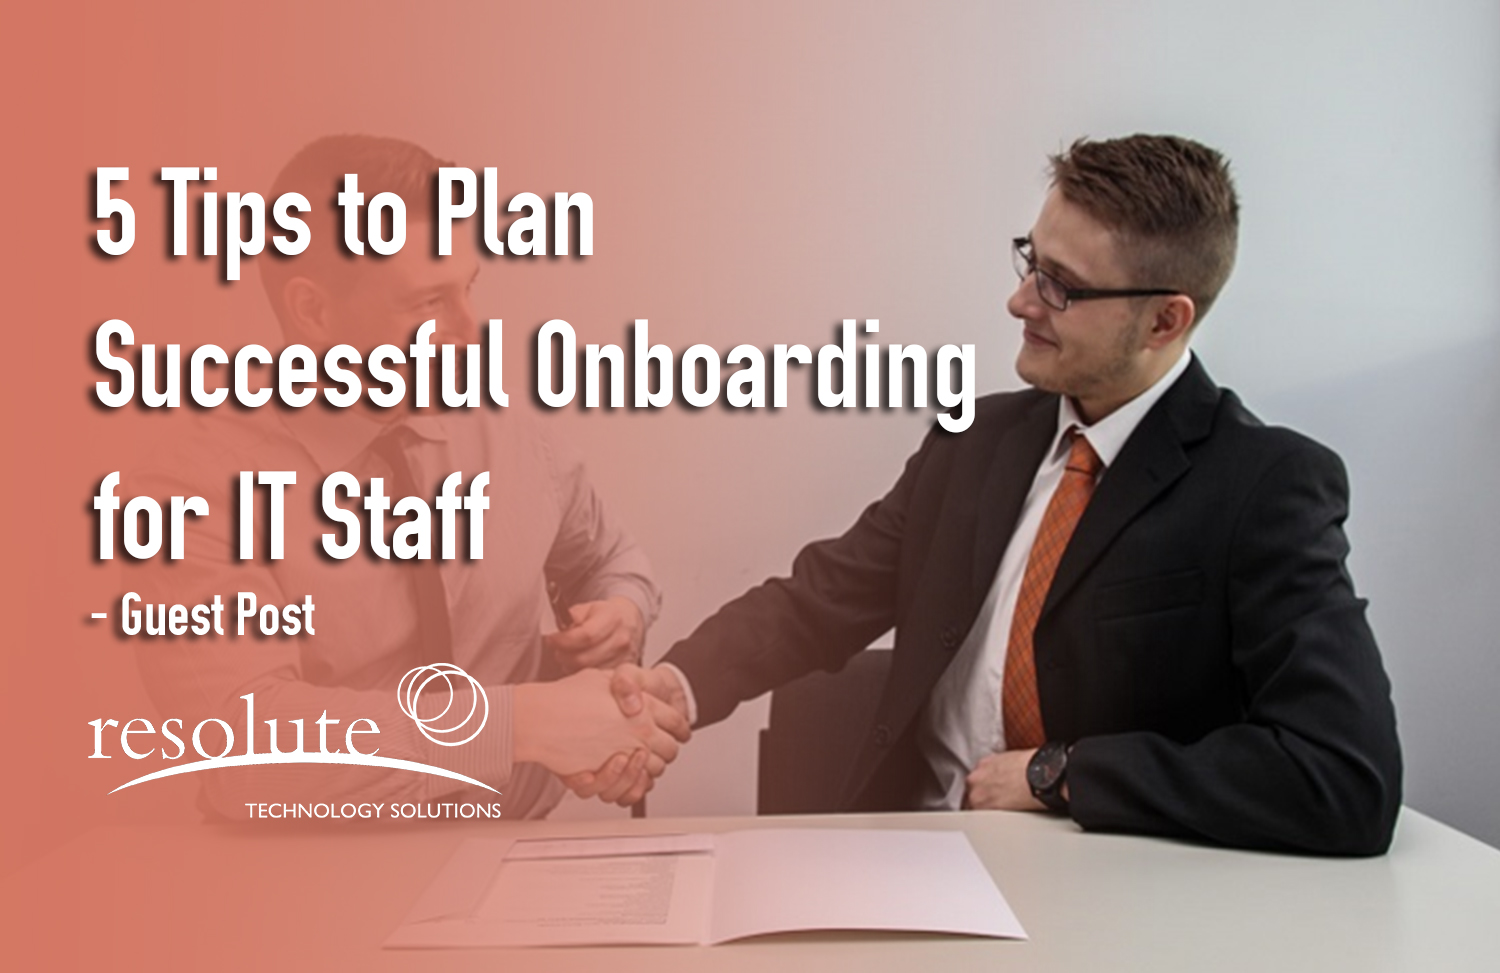 5 Tips to Plan a Successful Onboarding Program for IT Staff